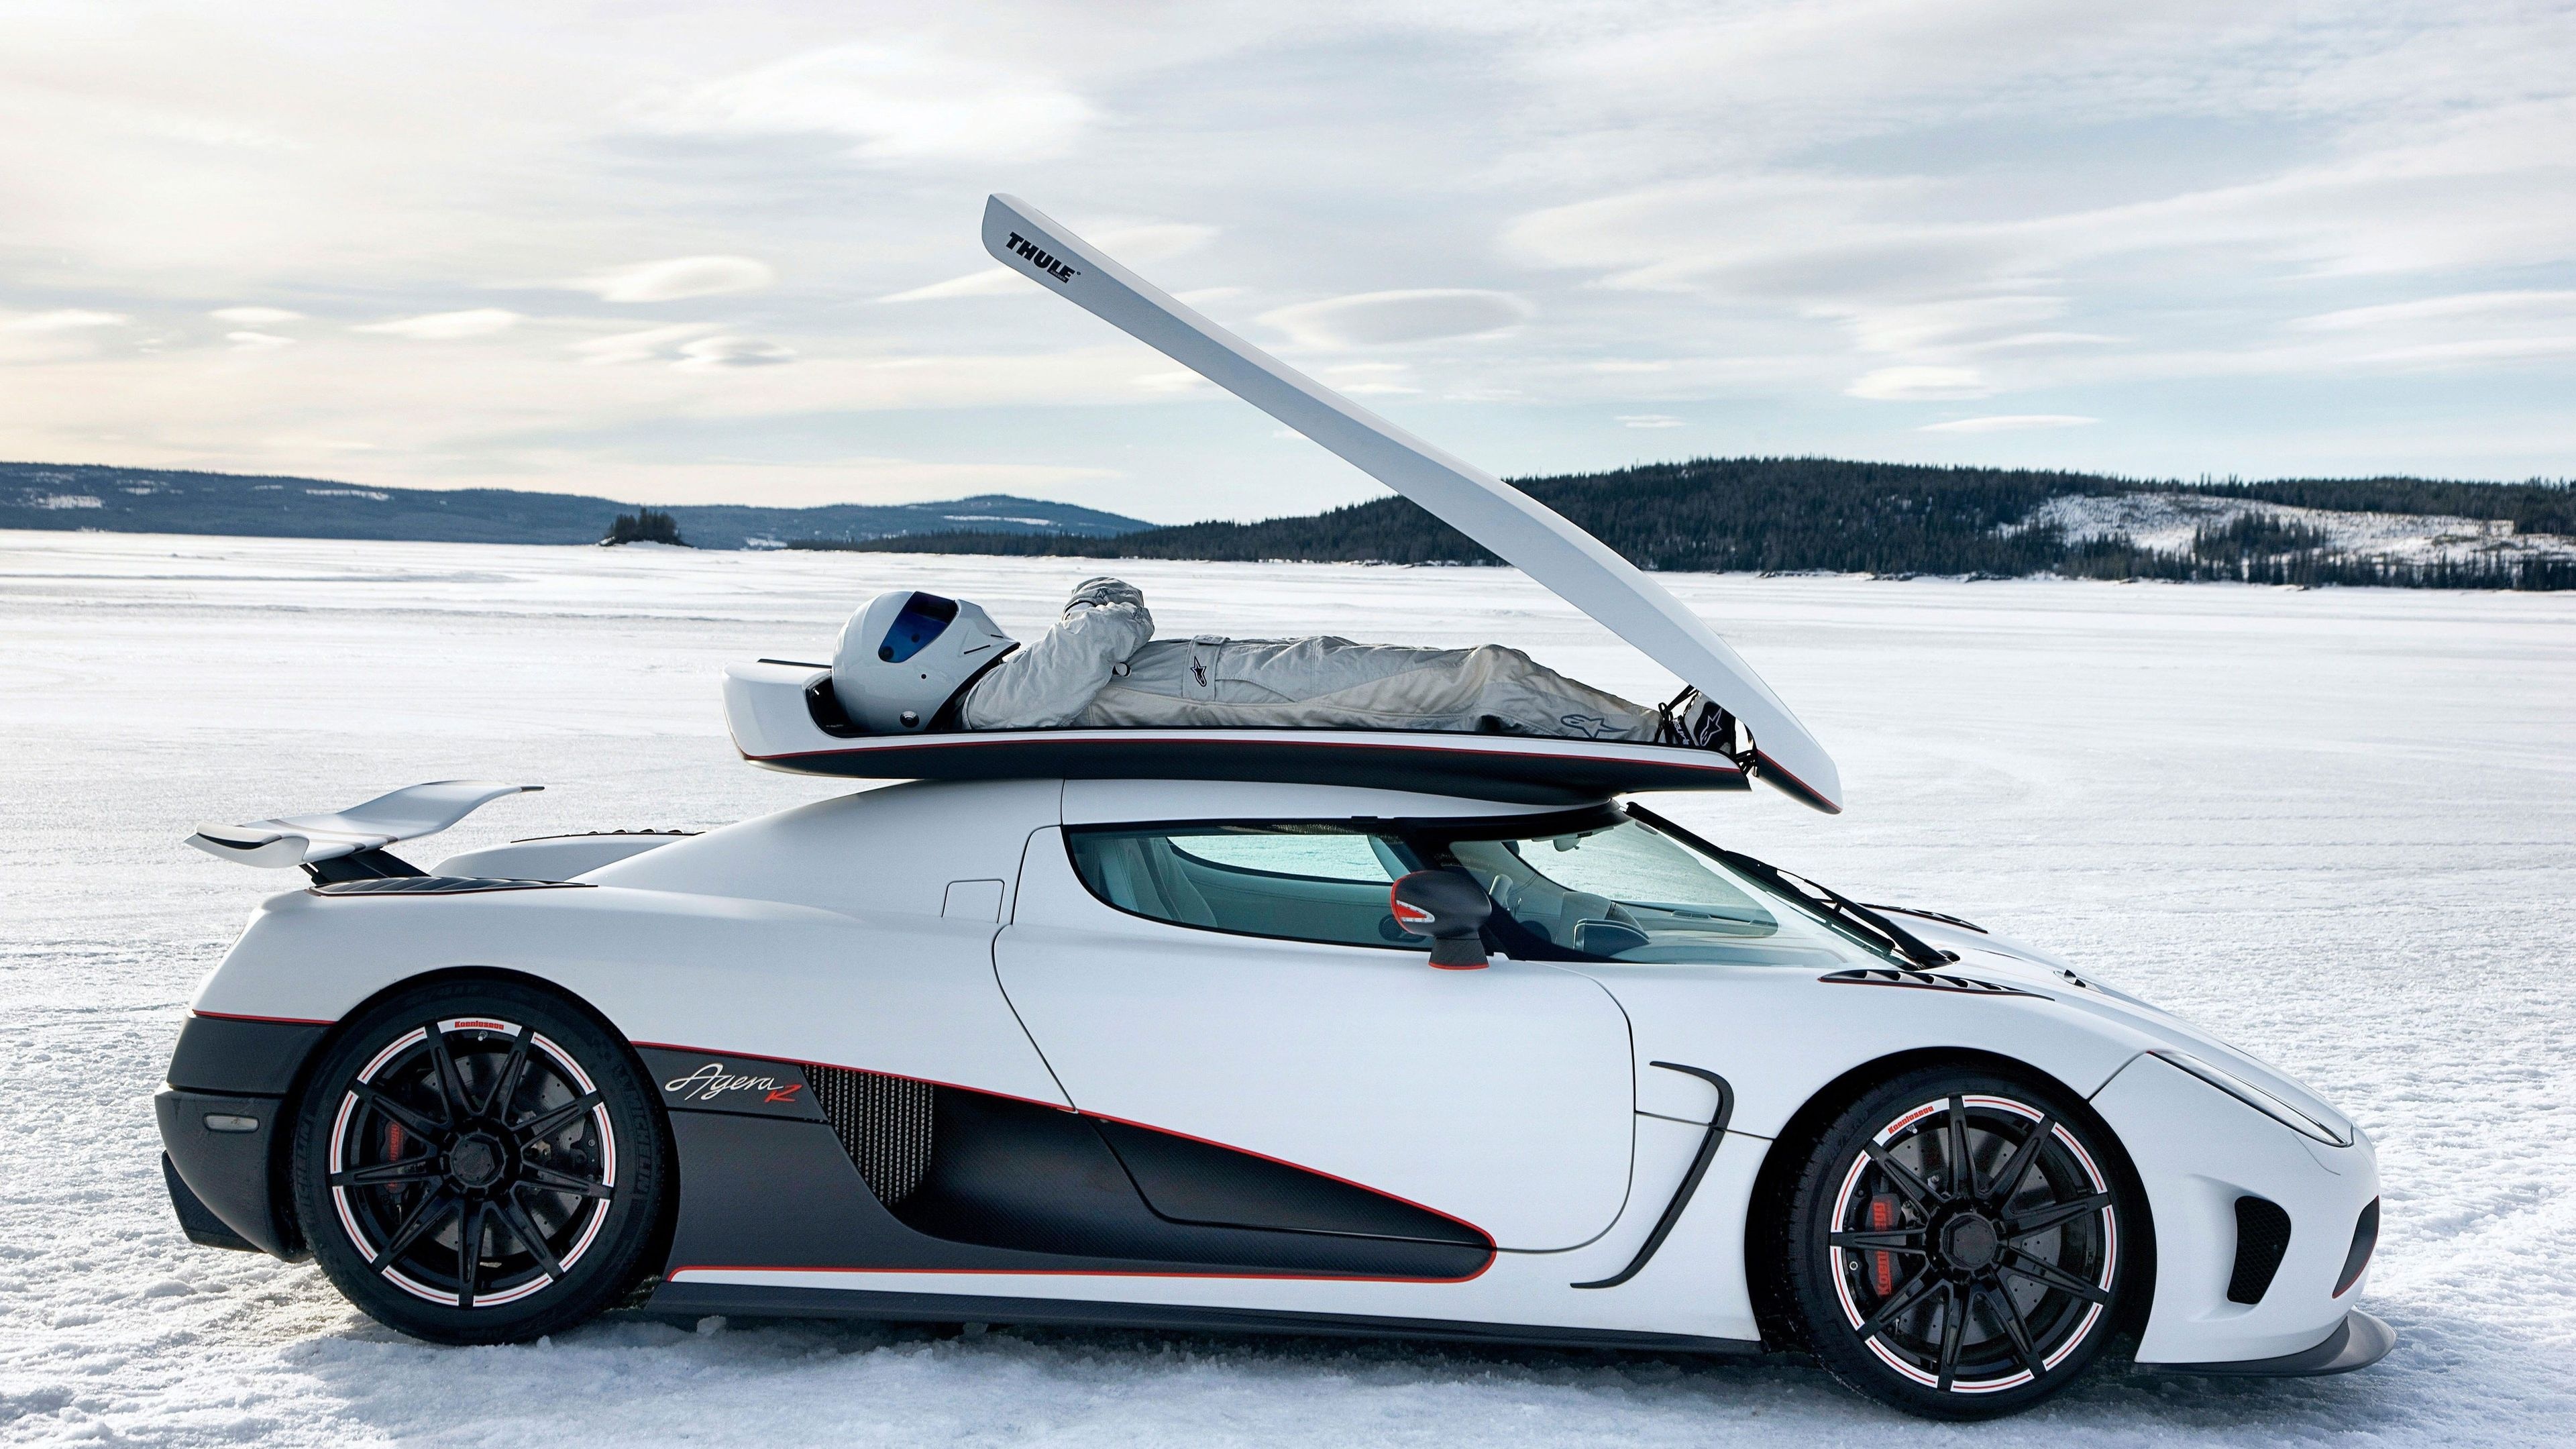 Koenigsegg Agera R and a Stig on a ice lake, HD wallpapers worth, Amazing speed, Unforgettable experience, 3840x2160 4K Desktop